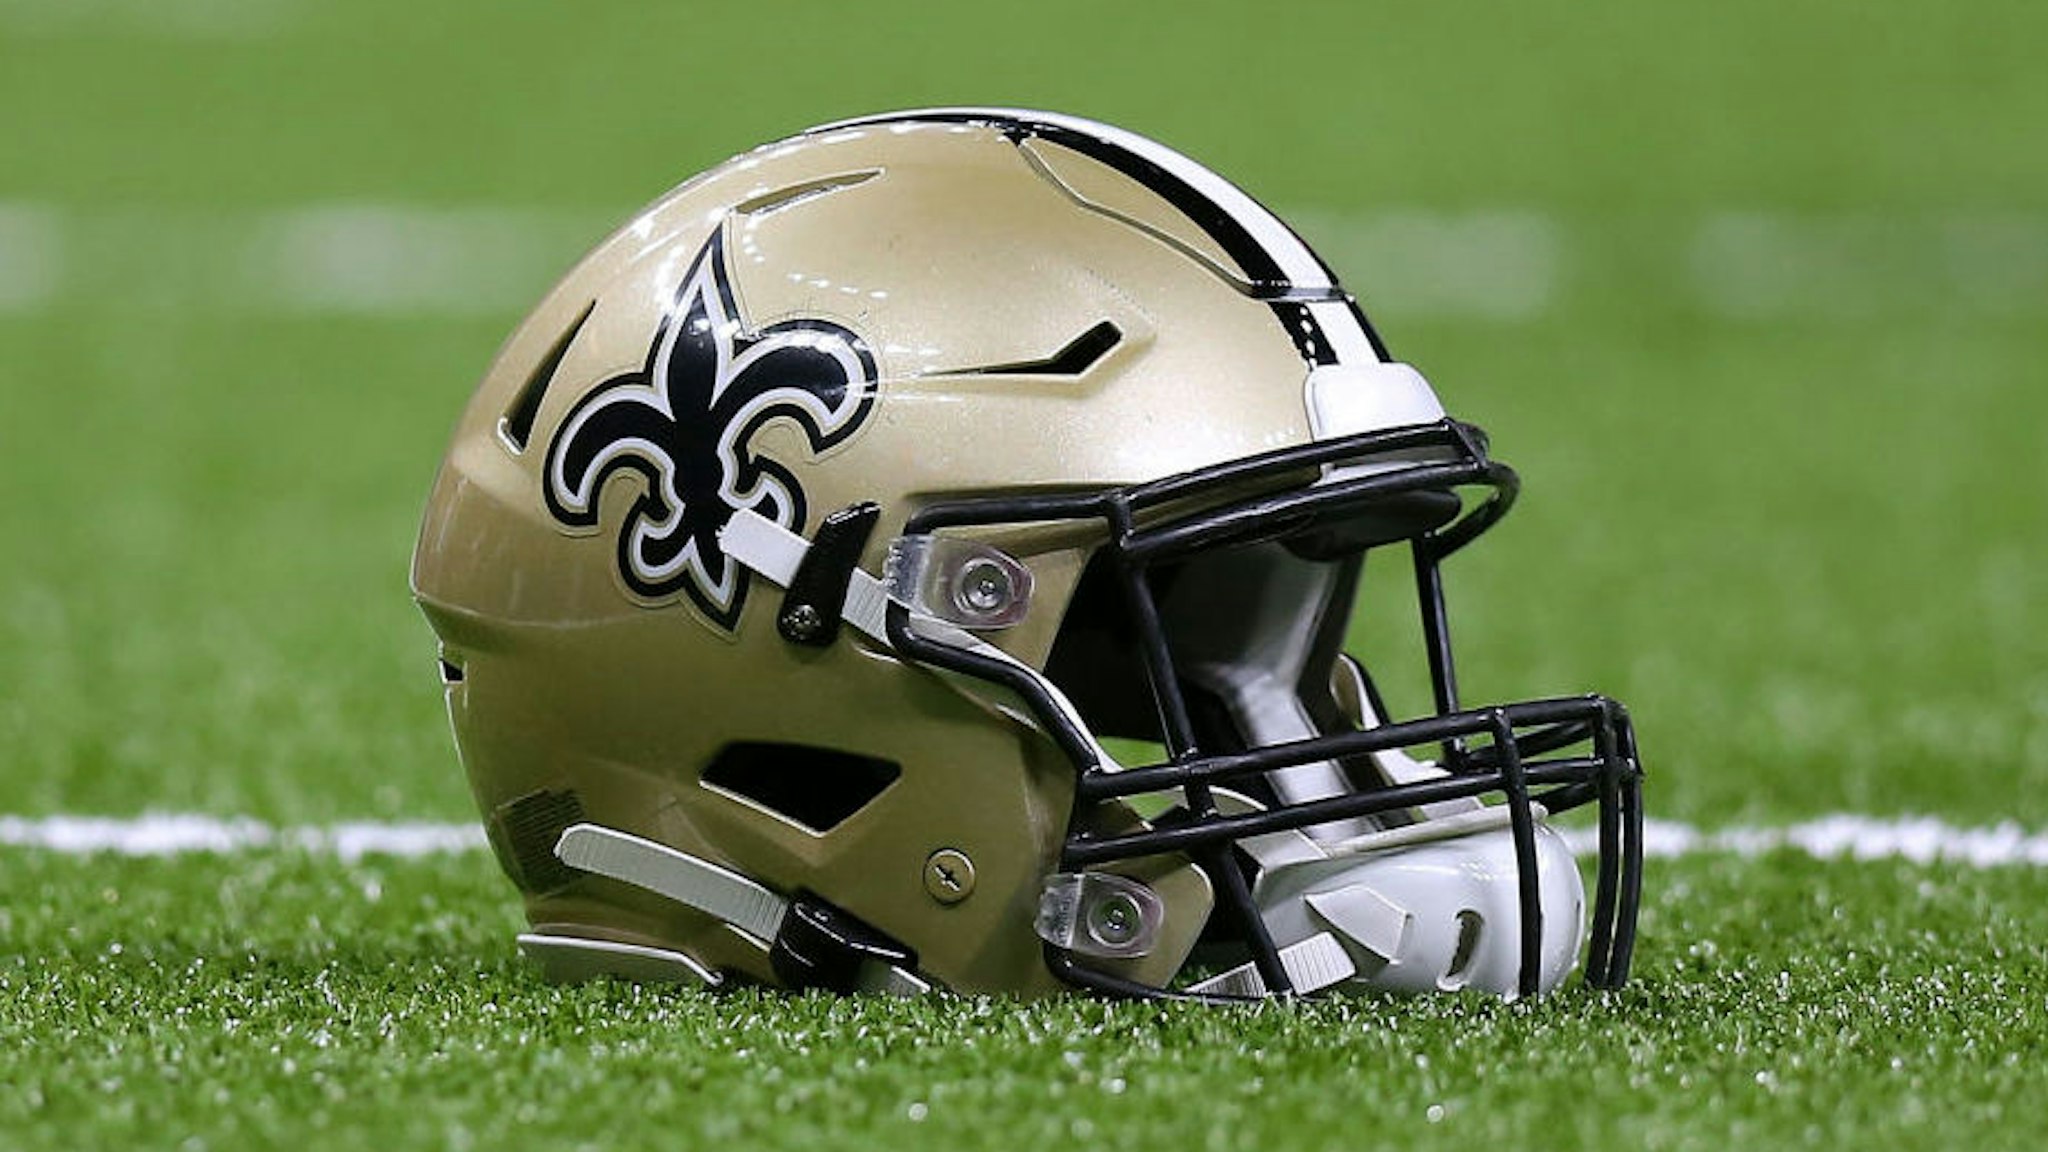 NEW ORLEANS, LOUISIANA - AUGUST 29: A New Orleans Saints helmet is pictured during an NFL preseason game at the Mercedes Benz Superdome on August 29, 2019 in New Orleans, Louisiana.